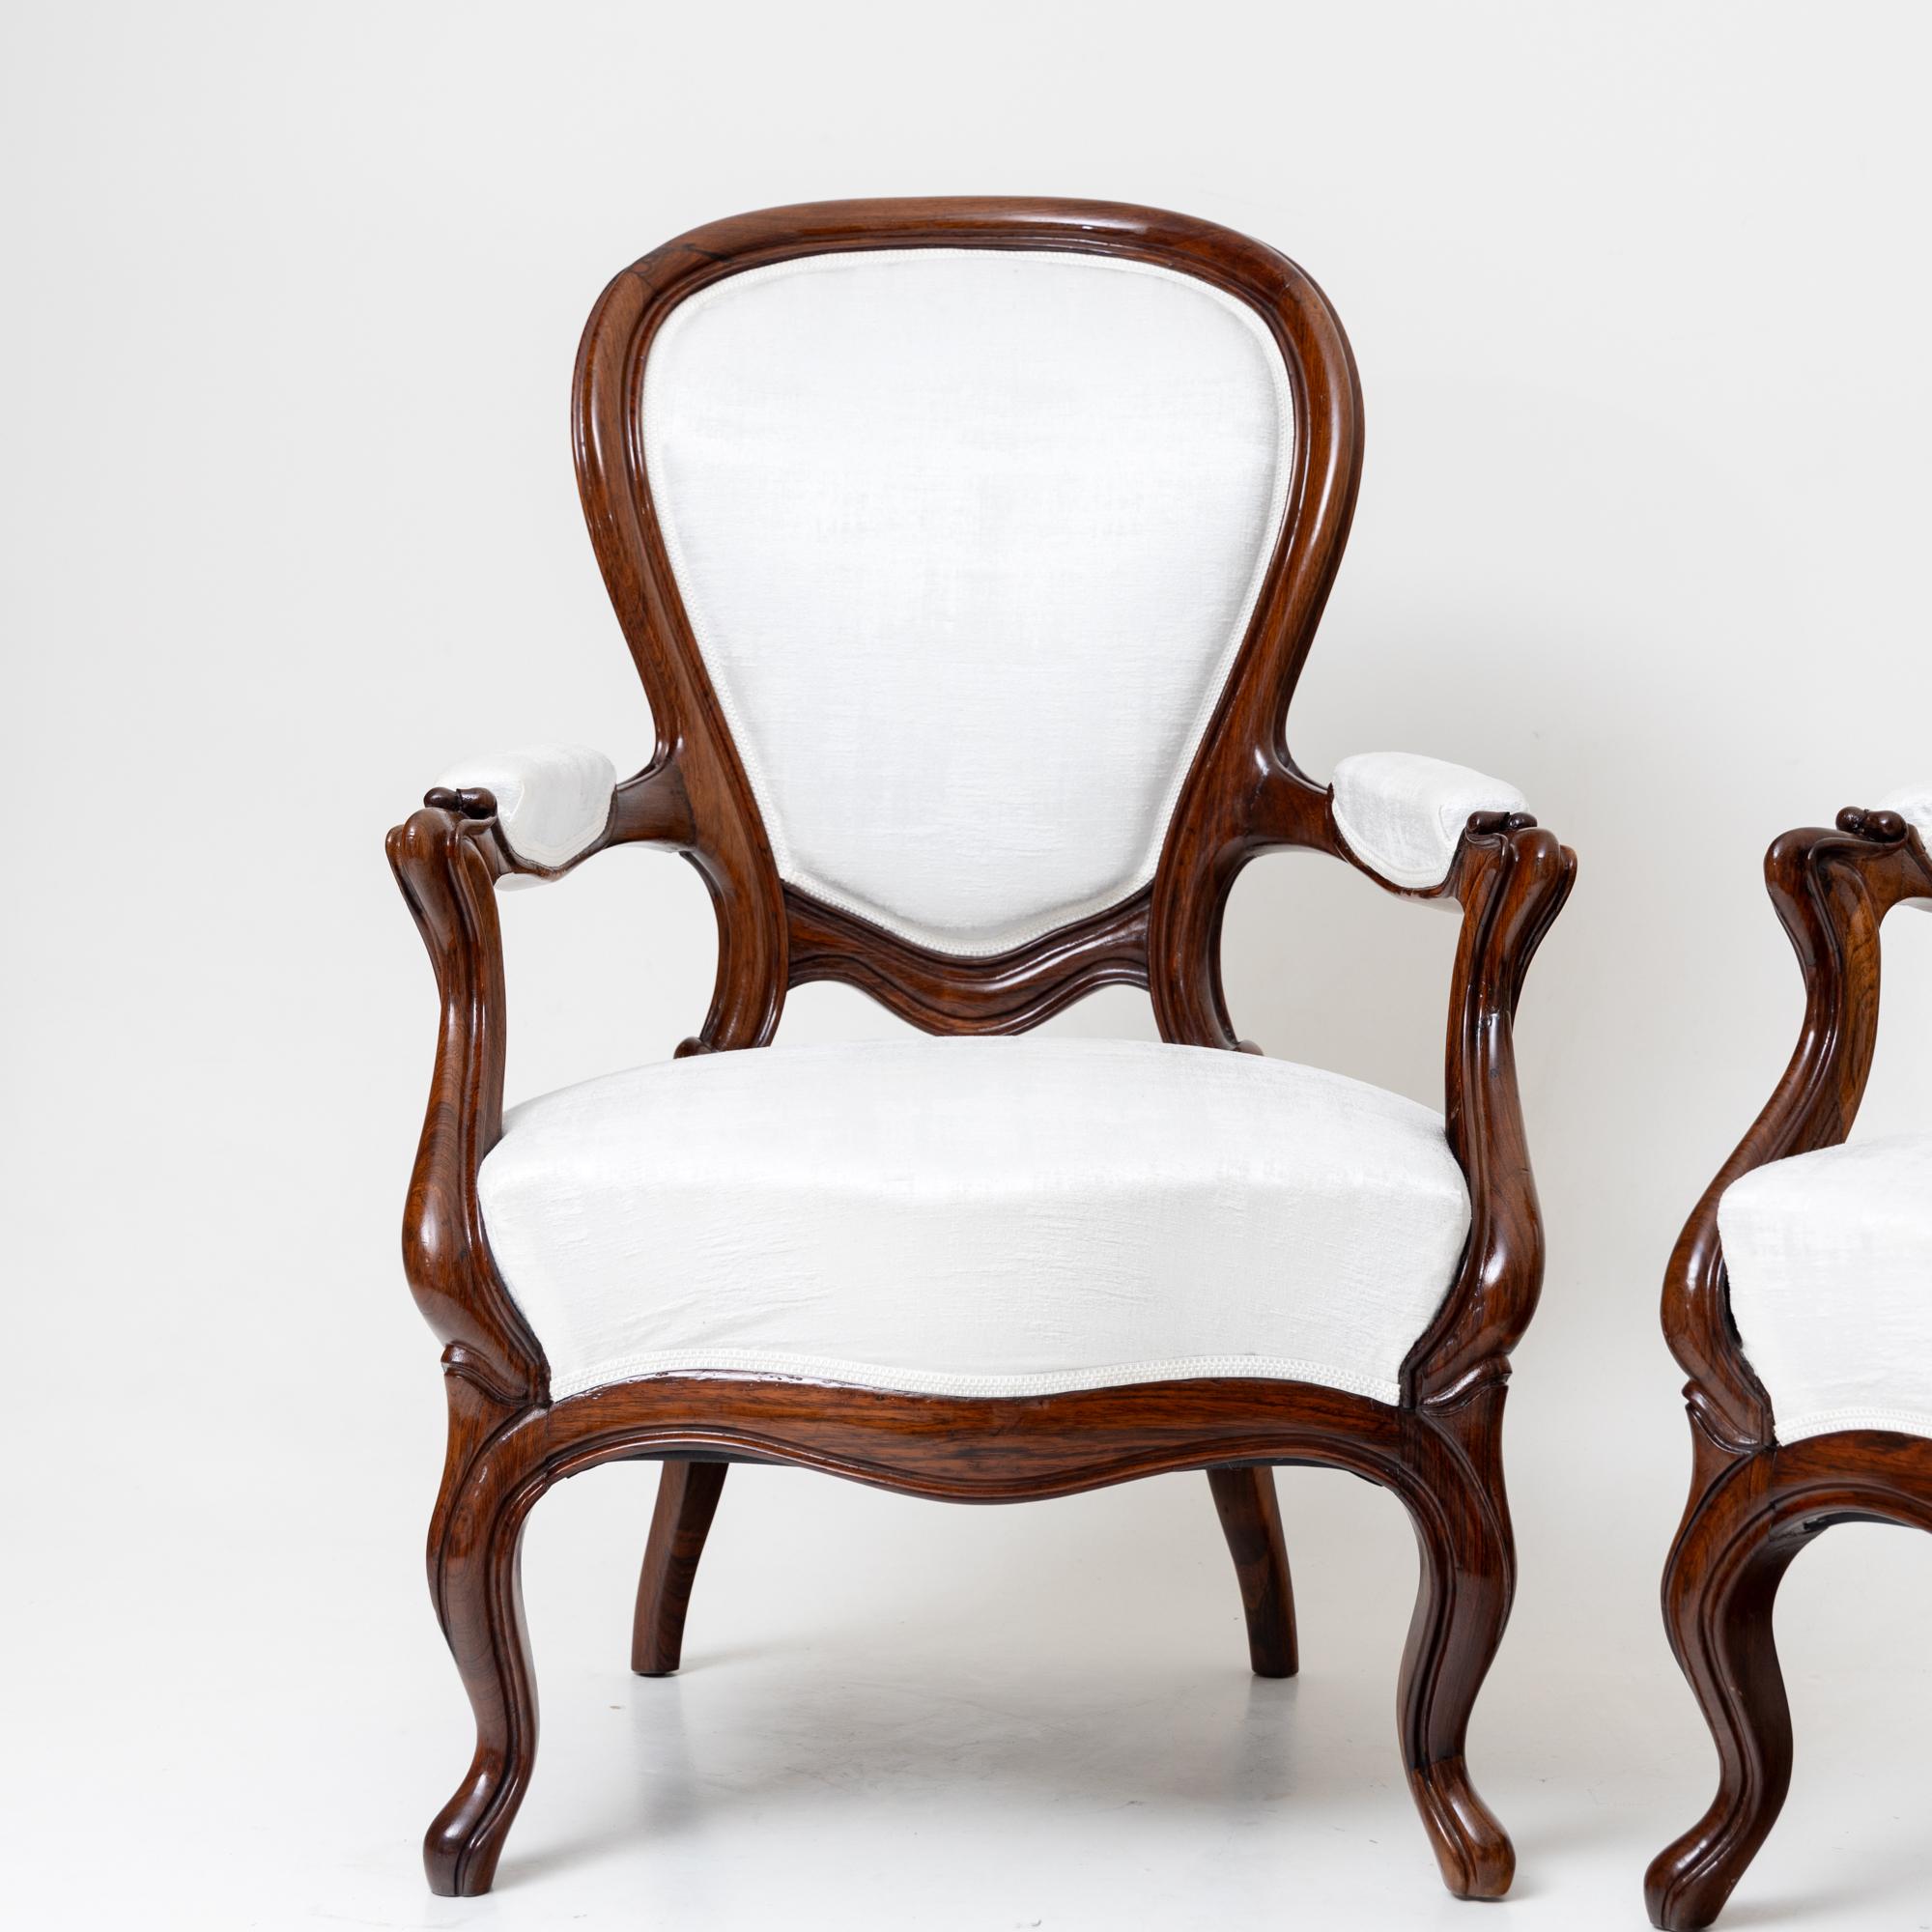 Pair of Louis Philippe armchairs on s-shaped curved legs with an elegant wavy frame and upholstered armrests. The balloon-shaped backrest and the seat and armrests are upholstered in a textured white fabric. These chairs have been carefully